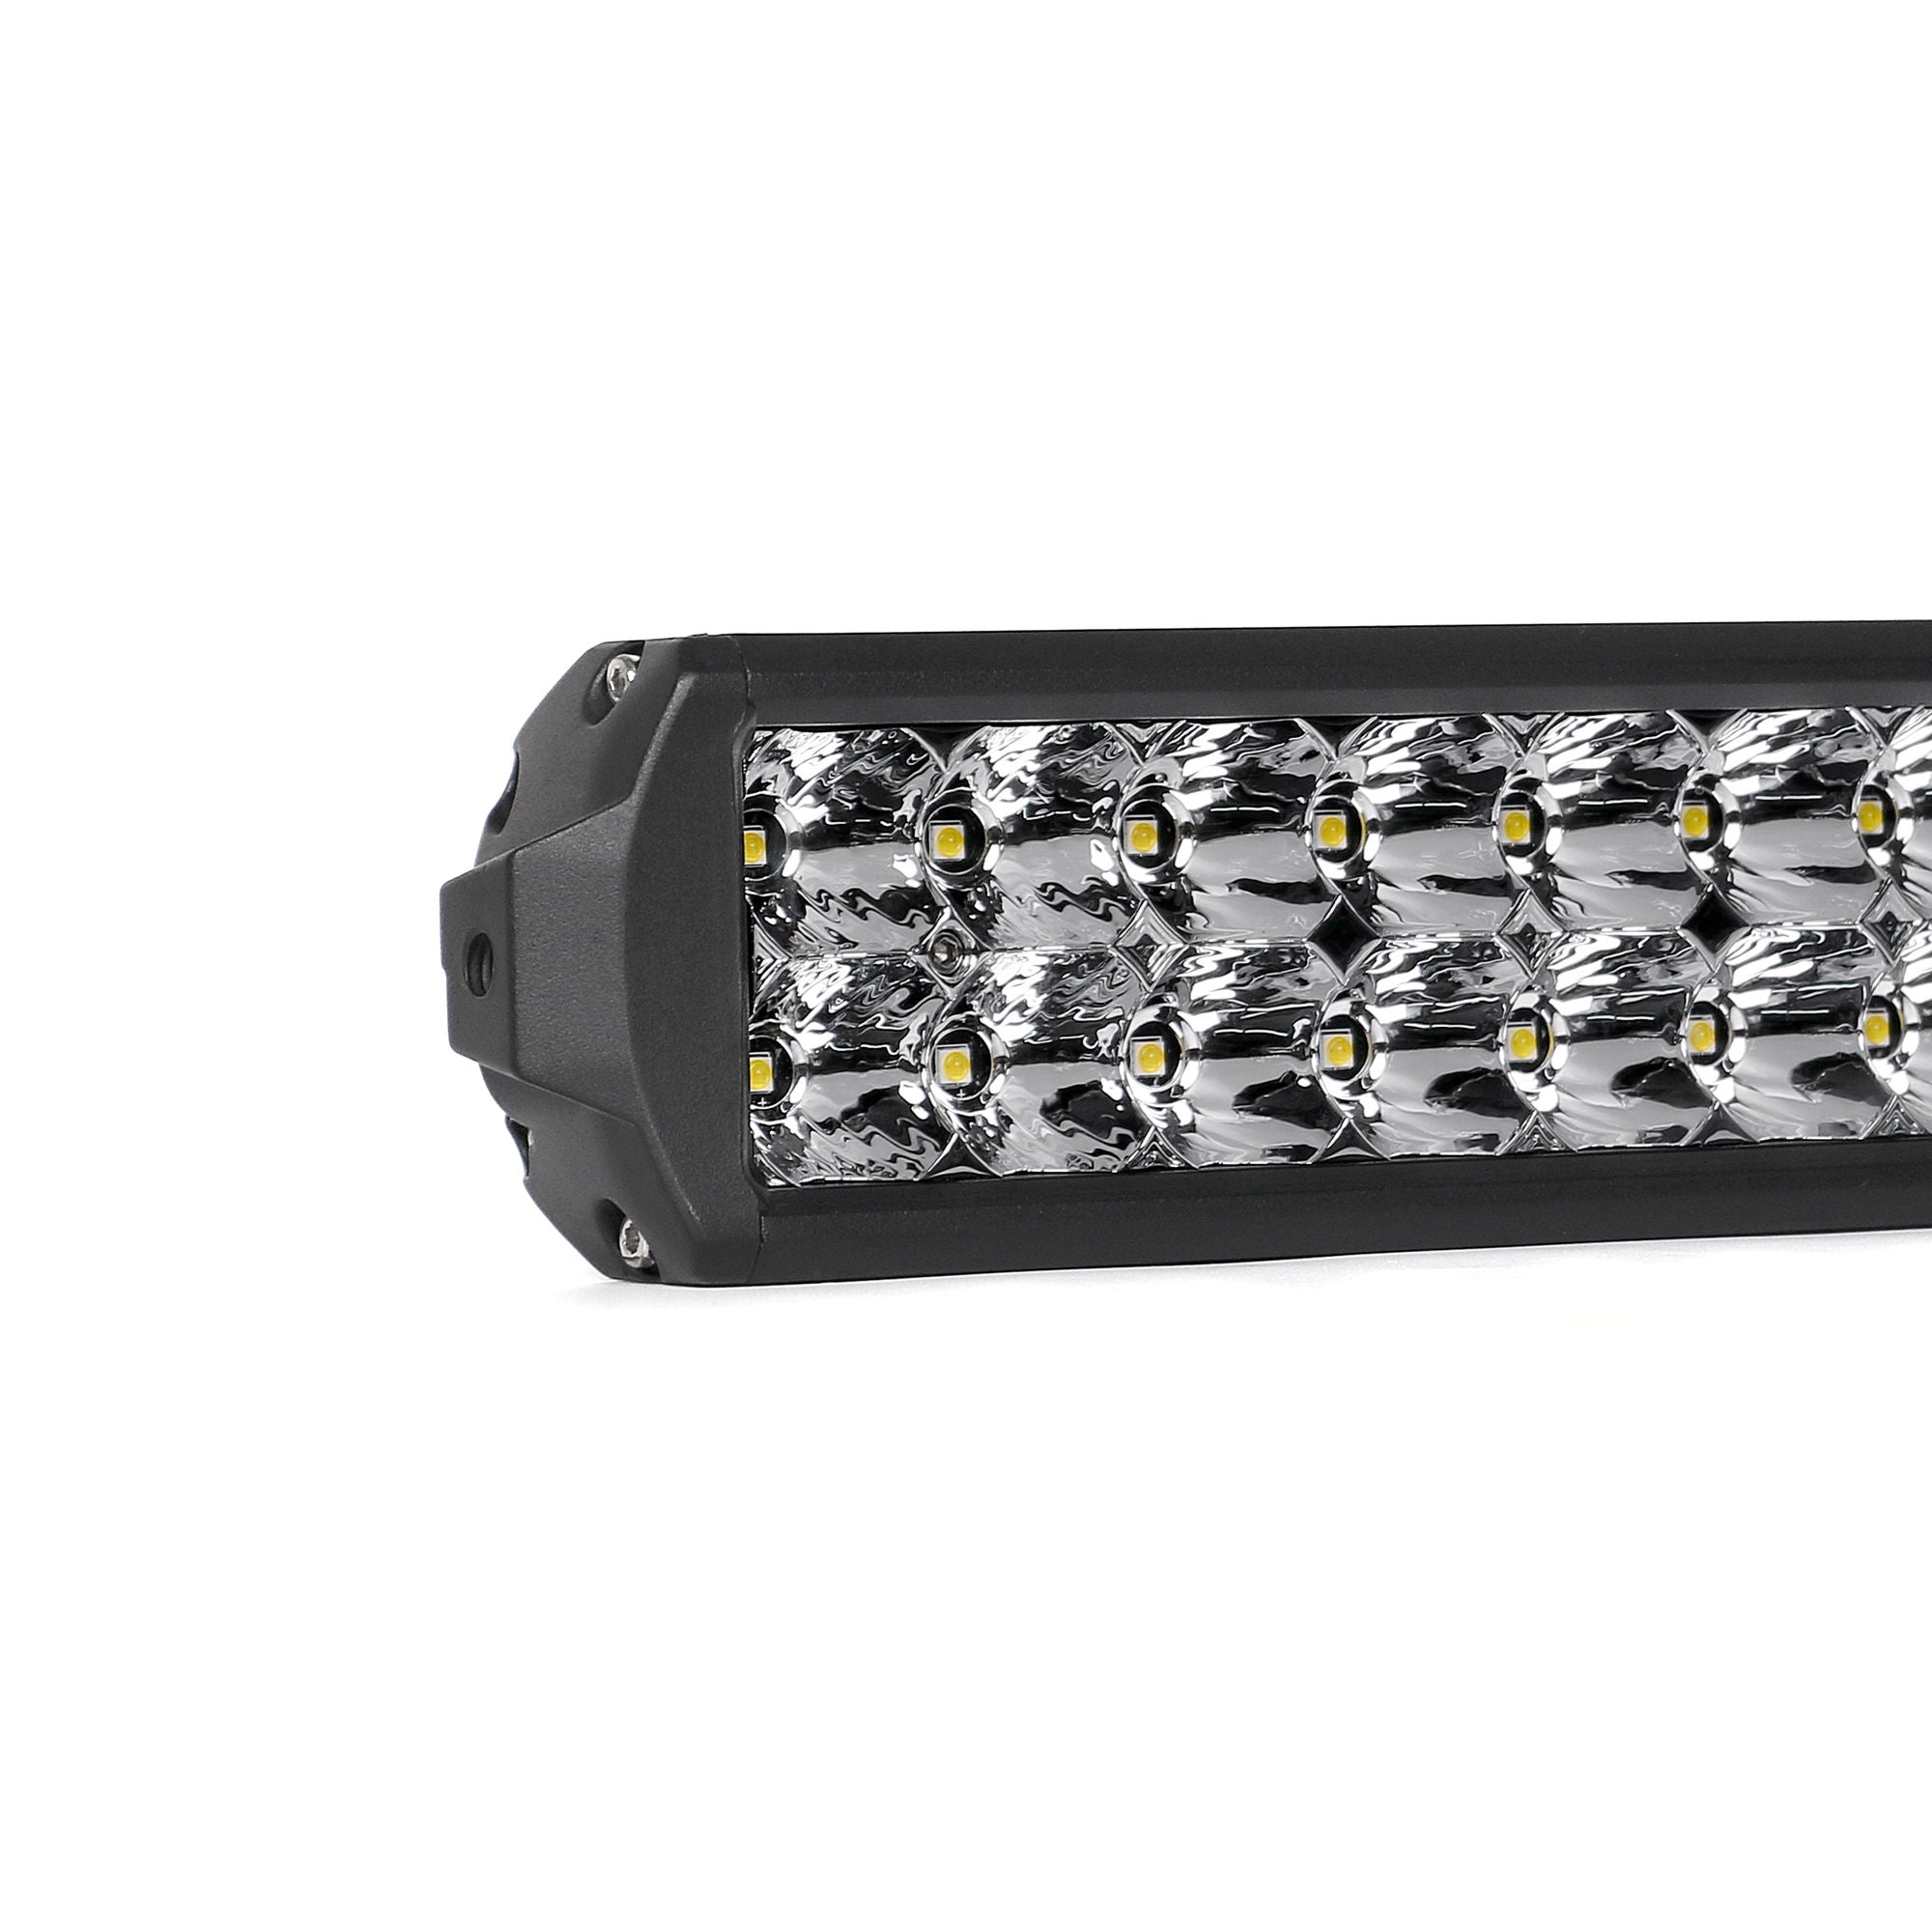 RTXOA49D811 - Dual Row Light Bar, 3W Led, No Screw Front Frame, Reflector, Combo, 40", 9450Lm